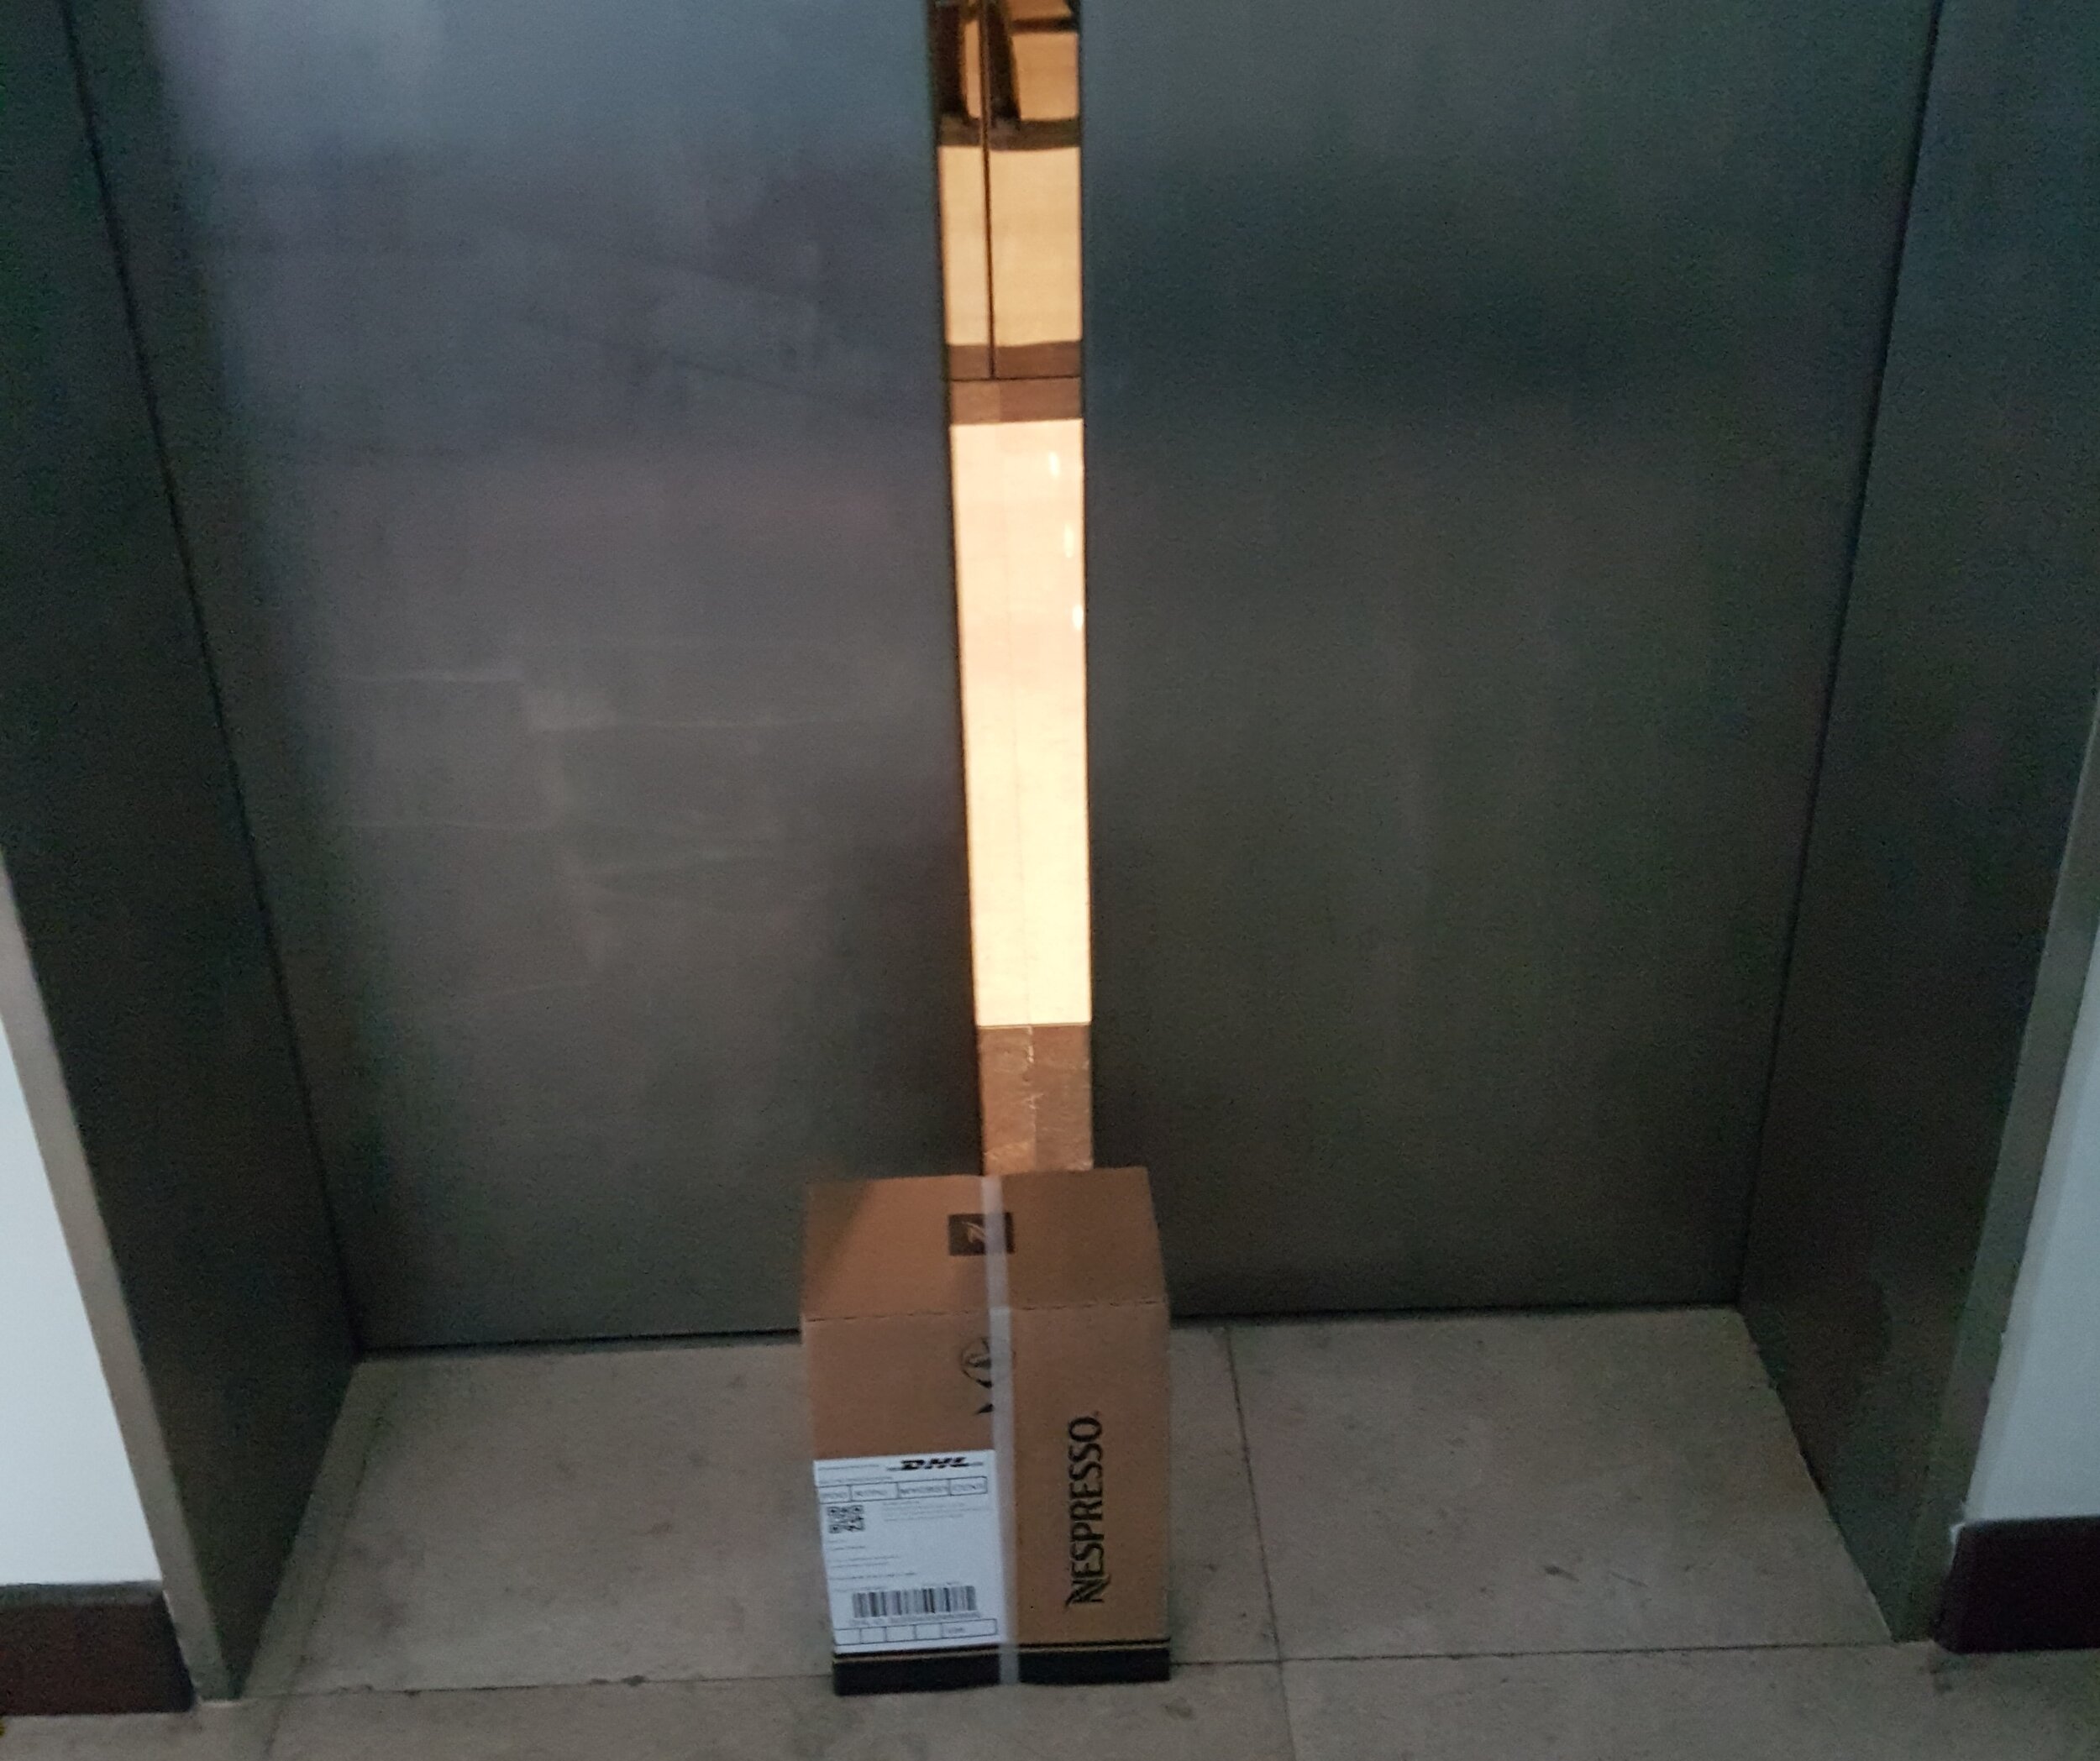 Home delivery via our elevator - no human contact....